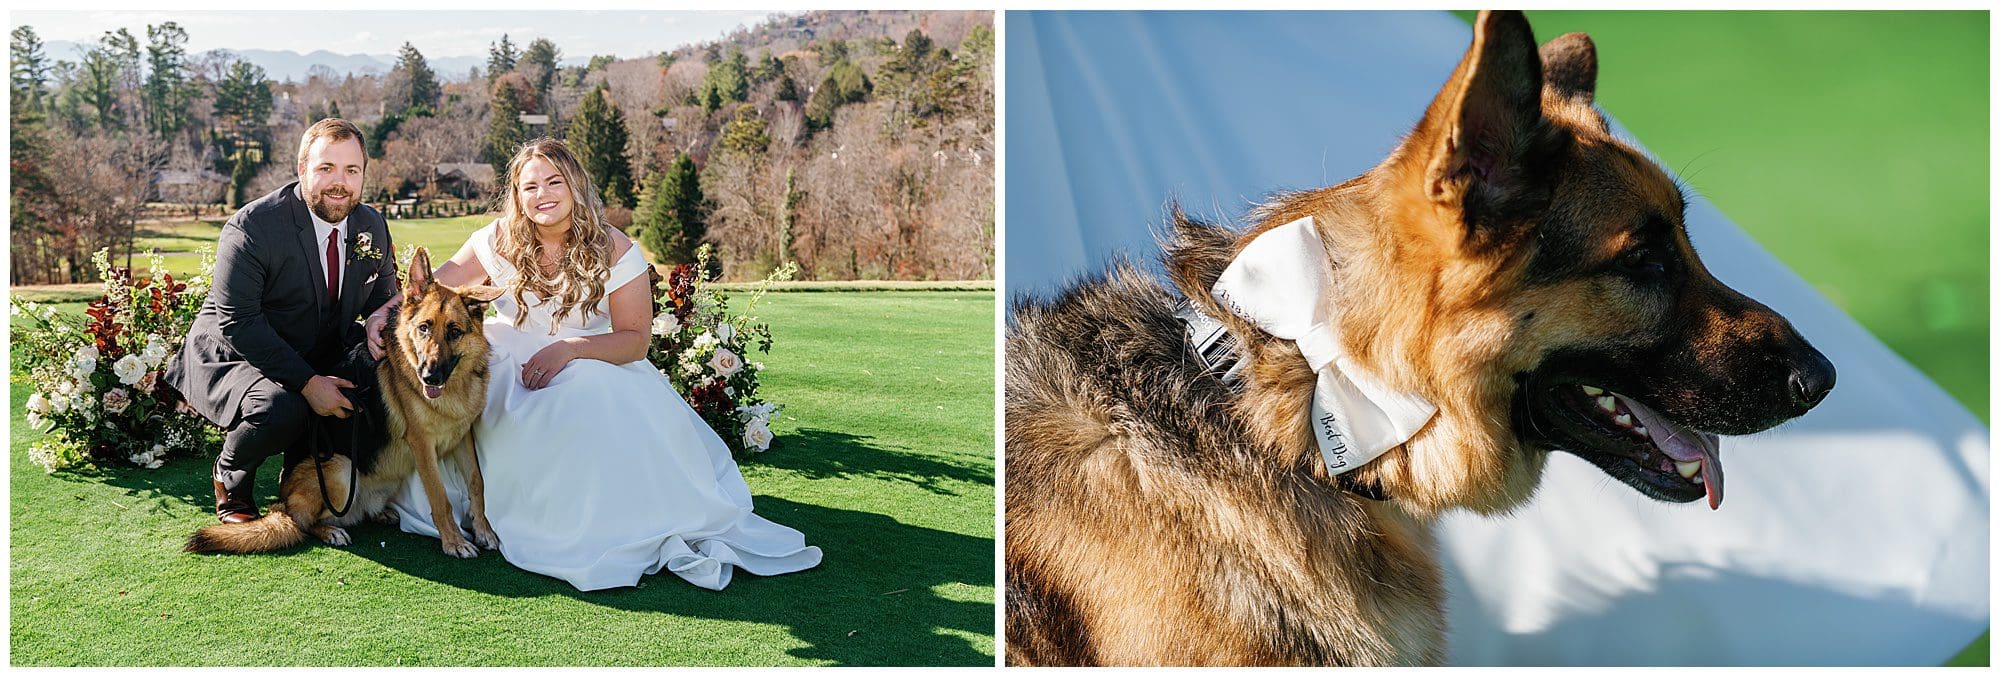 Two pictures of a bride and groom with a german shepherd.